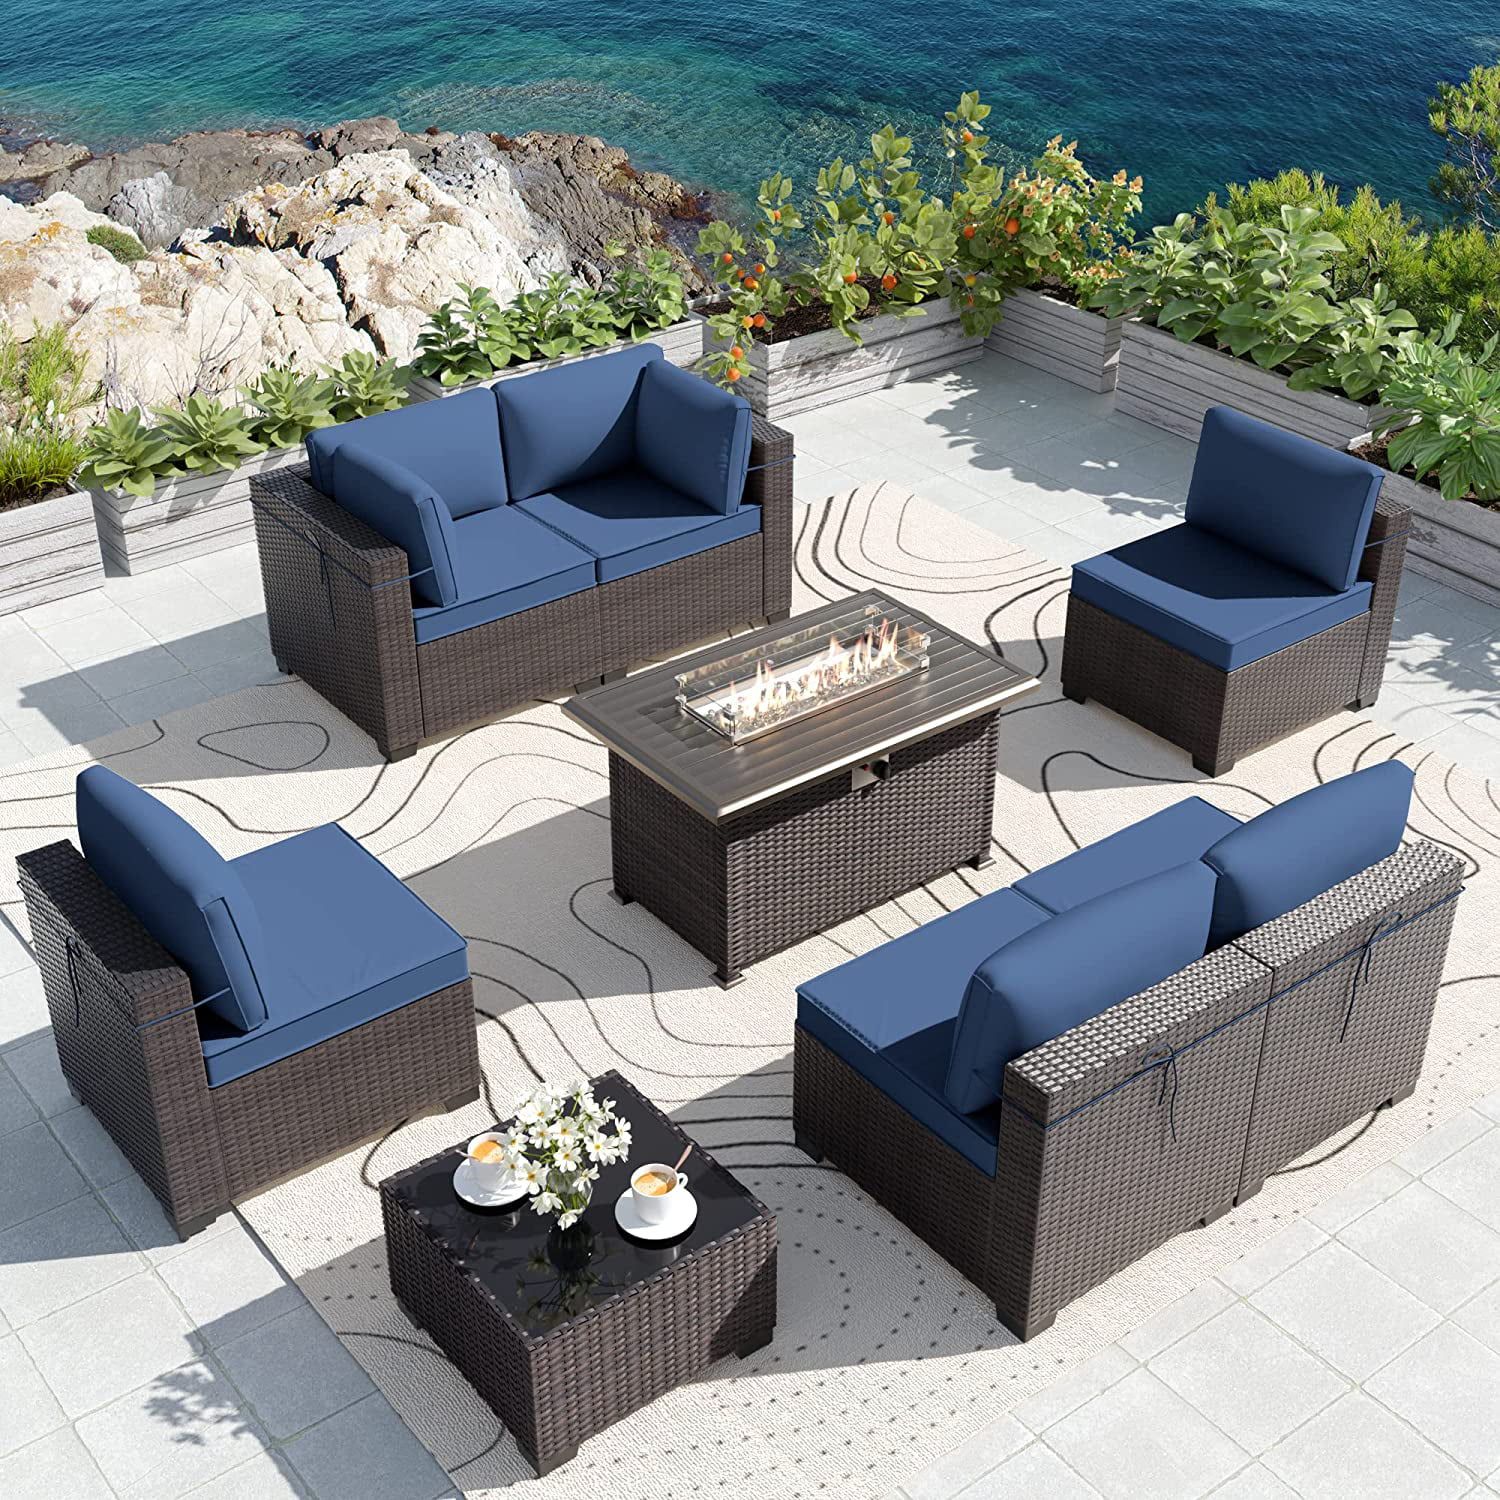 Gotland Outdoor Patio Sectional Furniture Set With 43" Propane Table 8pcs  Red Sponge Rattan Wicker – Walmart With Regard To 8 Pcs Outdoor Patio Furniture Set (View 10 of 15)